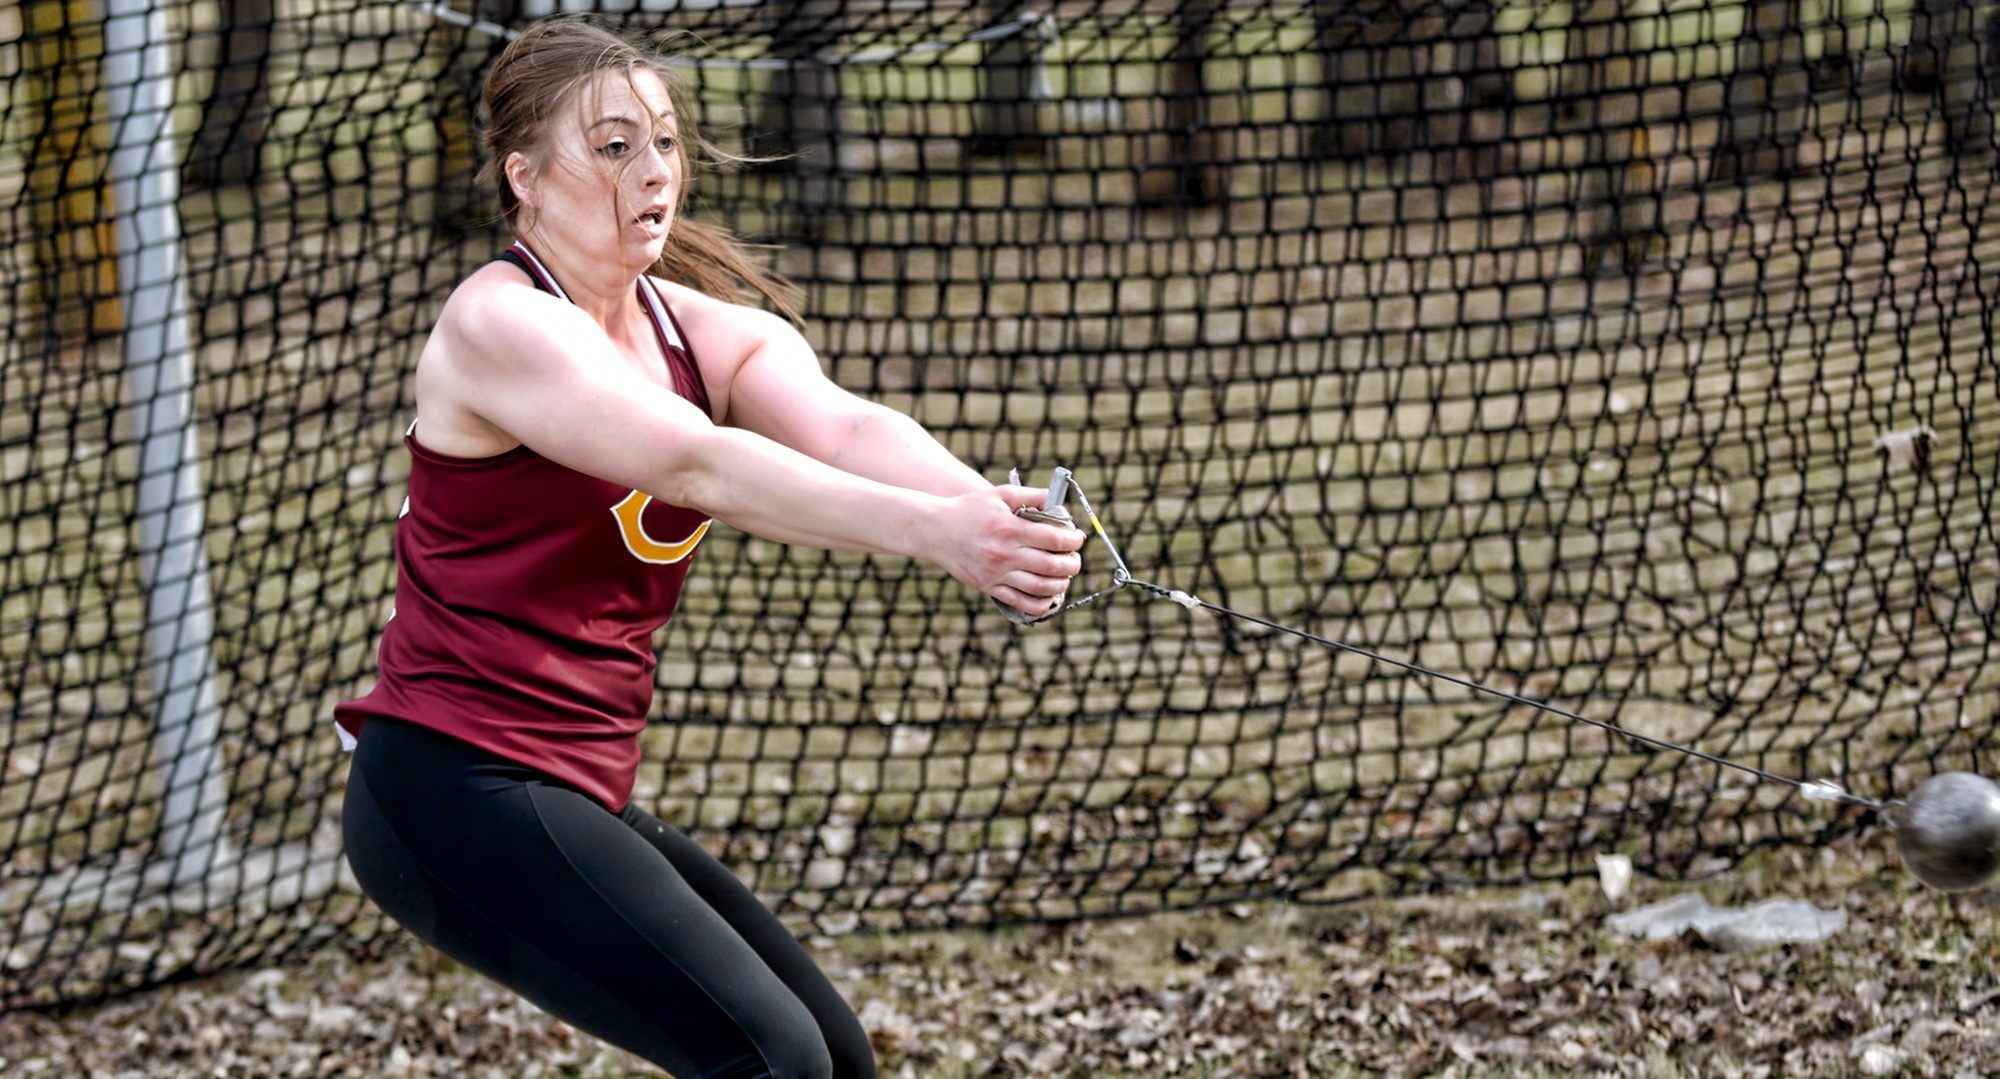 Senior Bailey Hovland won the hammer throw at the MIAC Meet on her very last attempt and also finished second in the discus.